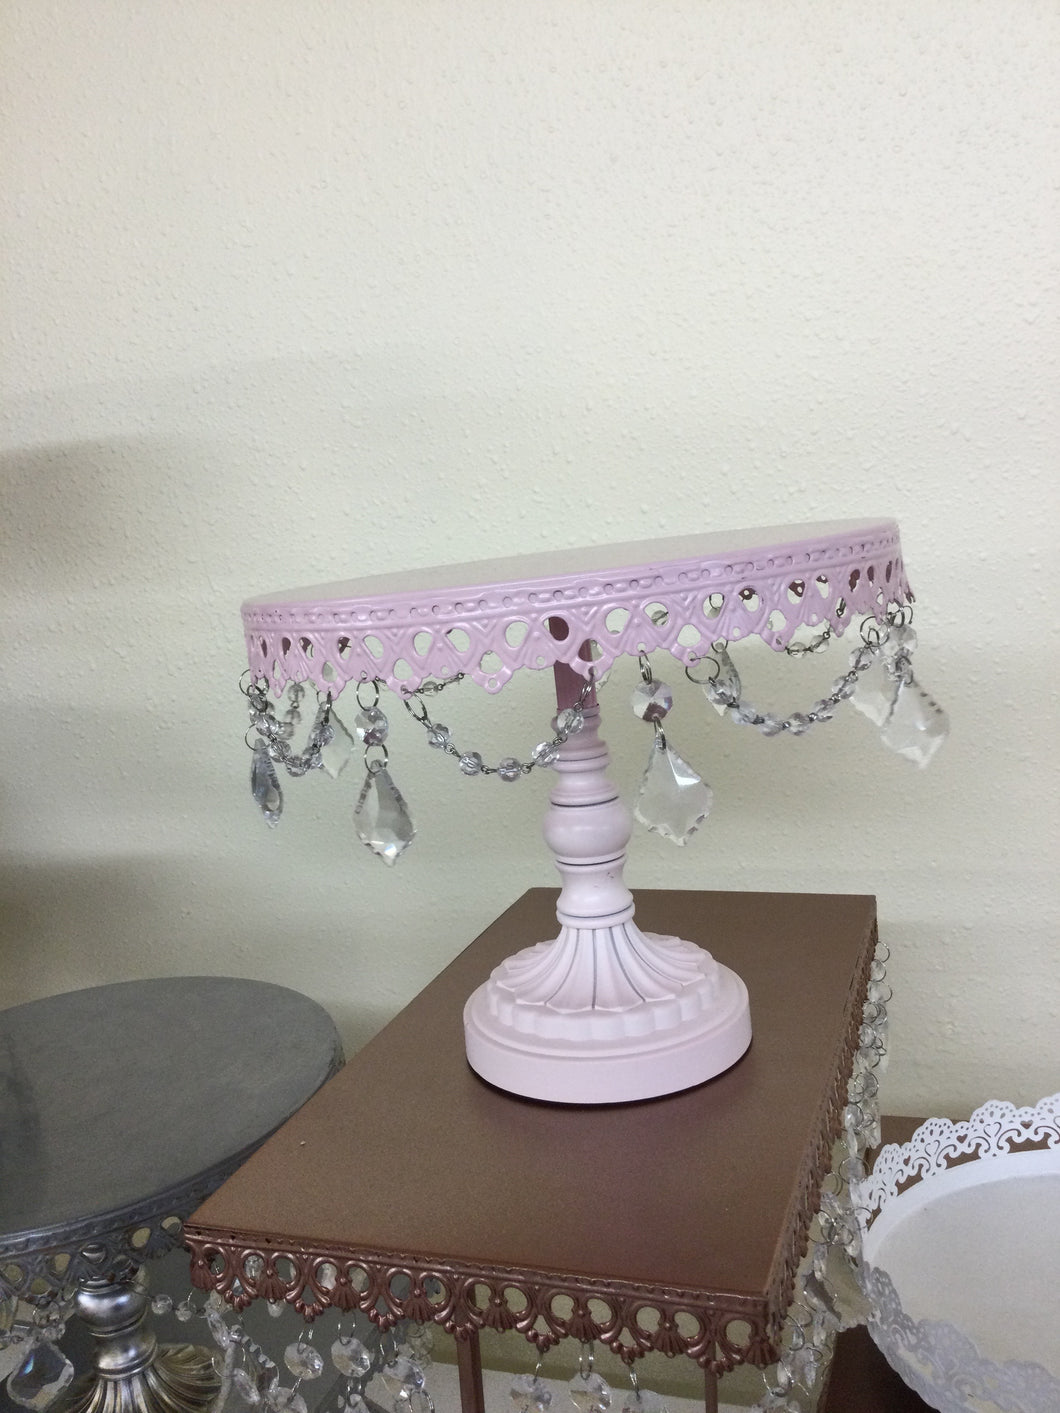 Small Round Dessert Stand with Hanging Crystals